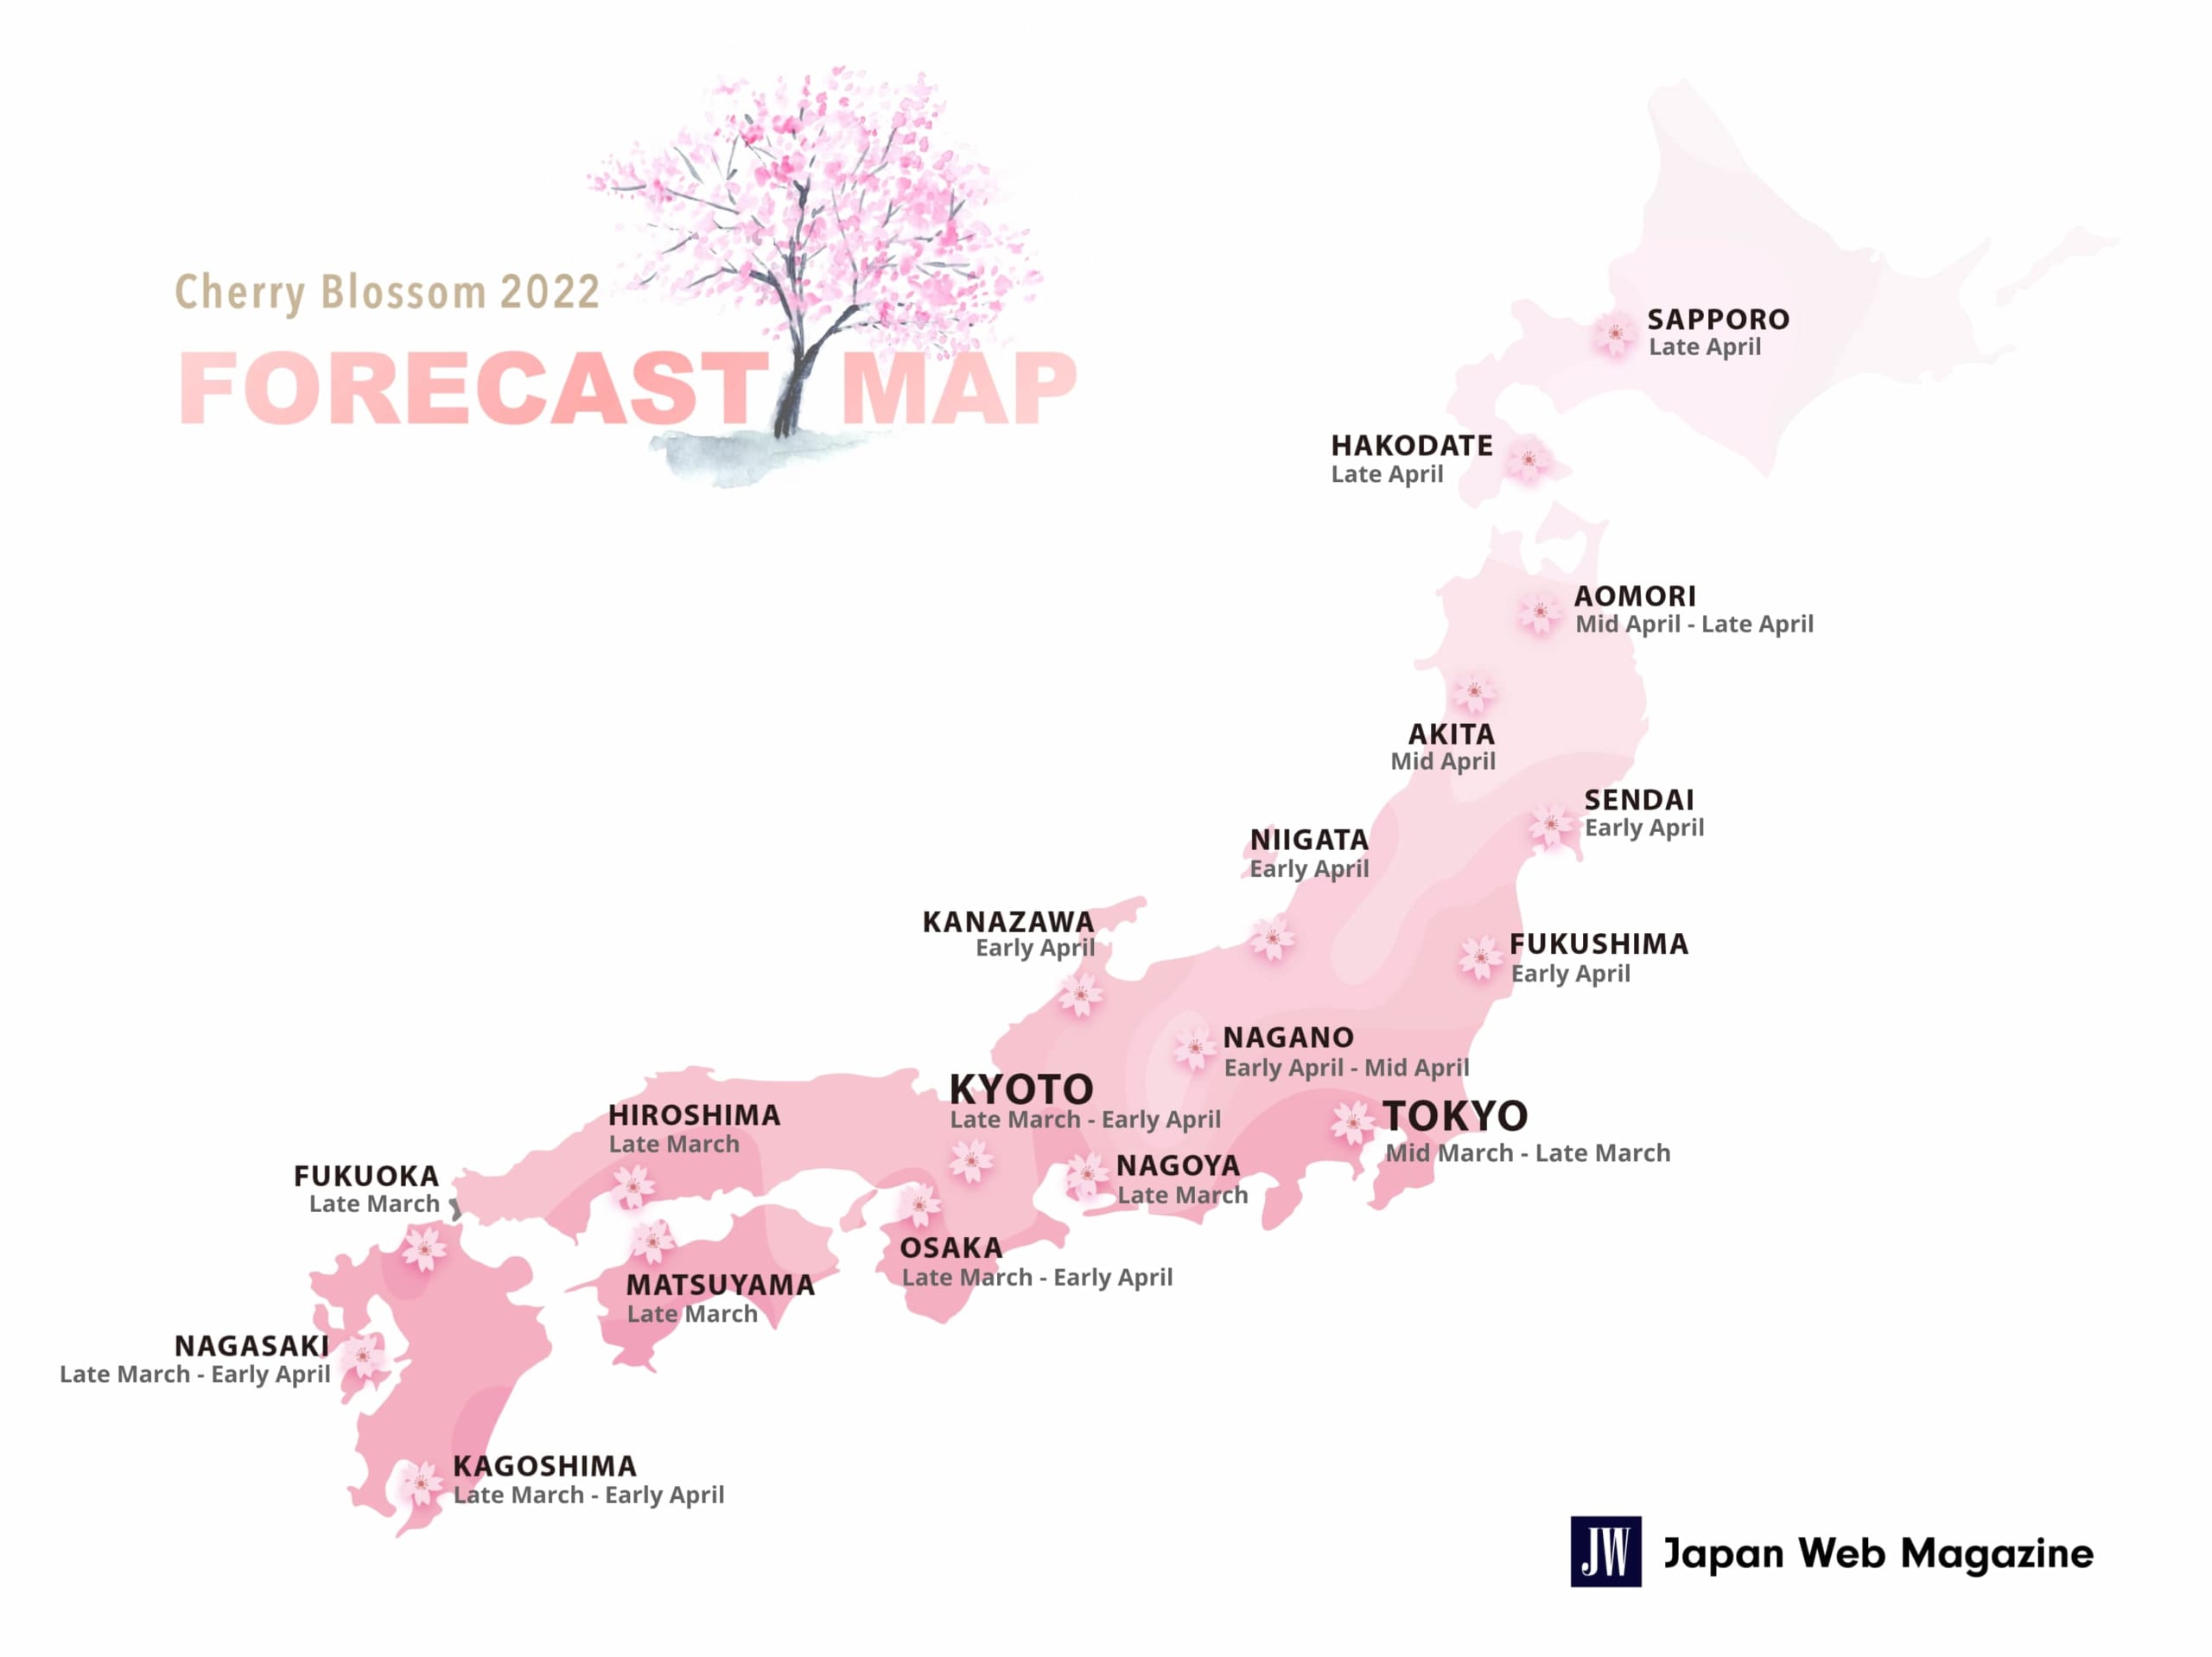 Cherry Blossom Forecast Map (March 10)